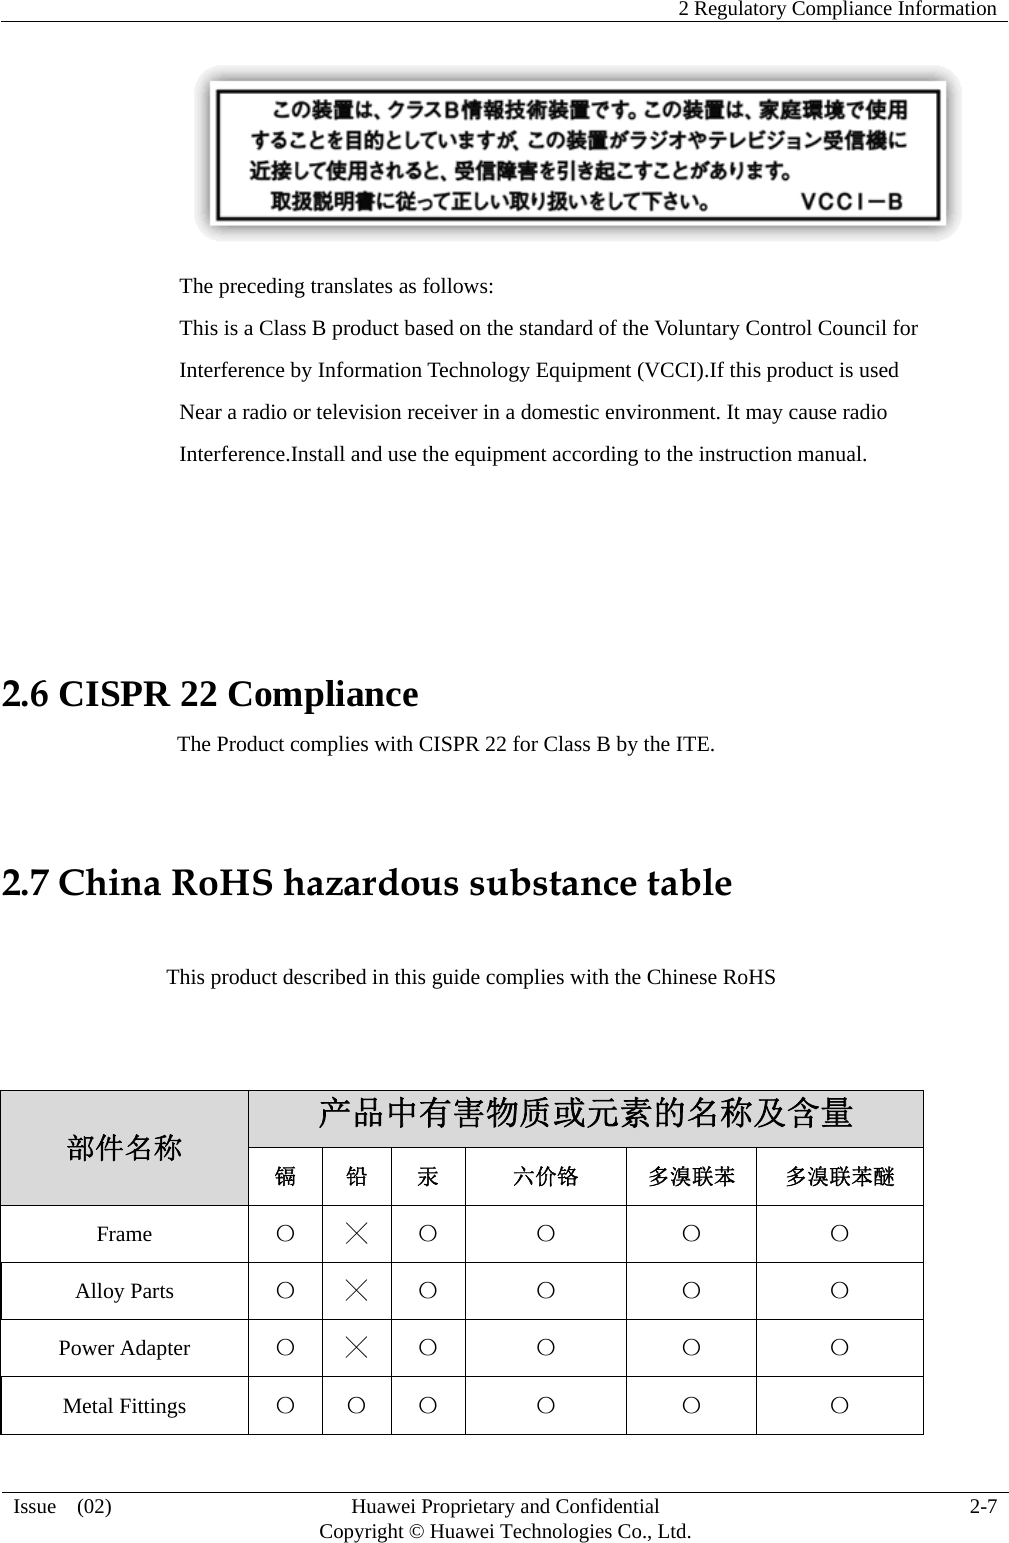    2 Regulatory Compliance Information   Issue  (02)  Huawei Proprietary and Confidential     Copyright © Huawei Technologies Co., Ltd.  2-7   The preceding translates as follows: This is a Class B product based on the standard of the Voluntary Control Council for Interference by Information Technology Equipment (VCCI).If this product is used Near a radio or television receiver in a domestic environment. It may cause radio Interference.Install and use the equipment according to the instruction manual.    2.6 CISPR 22 Compliance                                 The Product complies with CISPR 22 for Class B by the ITE.  2.7 China RoHS hazardous substance table                 This product described in this guide complies with the Chinese RoHS   部件名称 产品中有害物质或元素的名称及含量 镉 铅 汞 六价铬 多溴联苯 多溴联苯醚 Frame  〇 ╳ 〇 〇 〇 〇 Alloy Parts  〇 ╳ 〇 〇 〇 〇 Power Adapter  〇 ╳ 〇 〇 〇 〇 Metal Fittings  〇 〇 〇 〇 〇 〇 